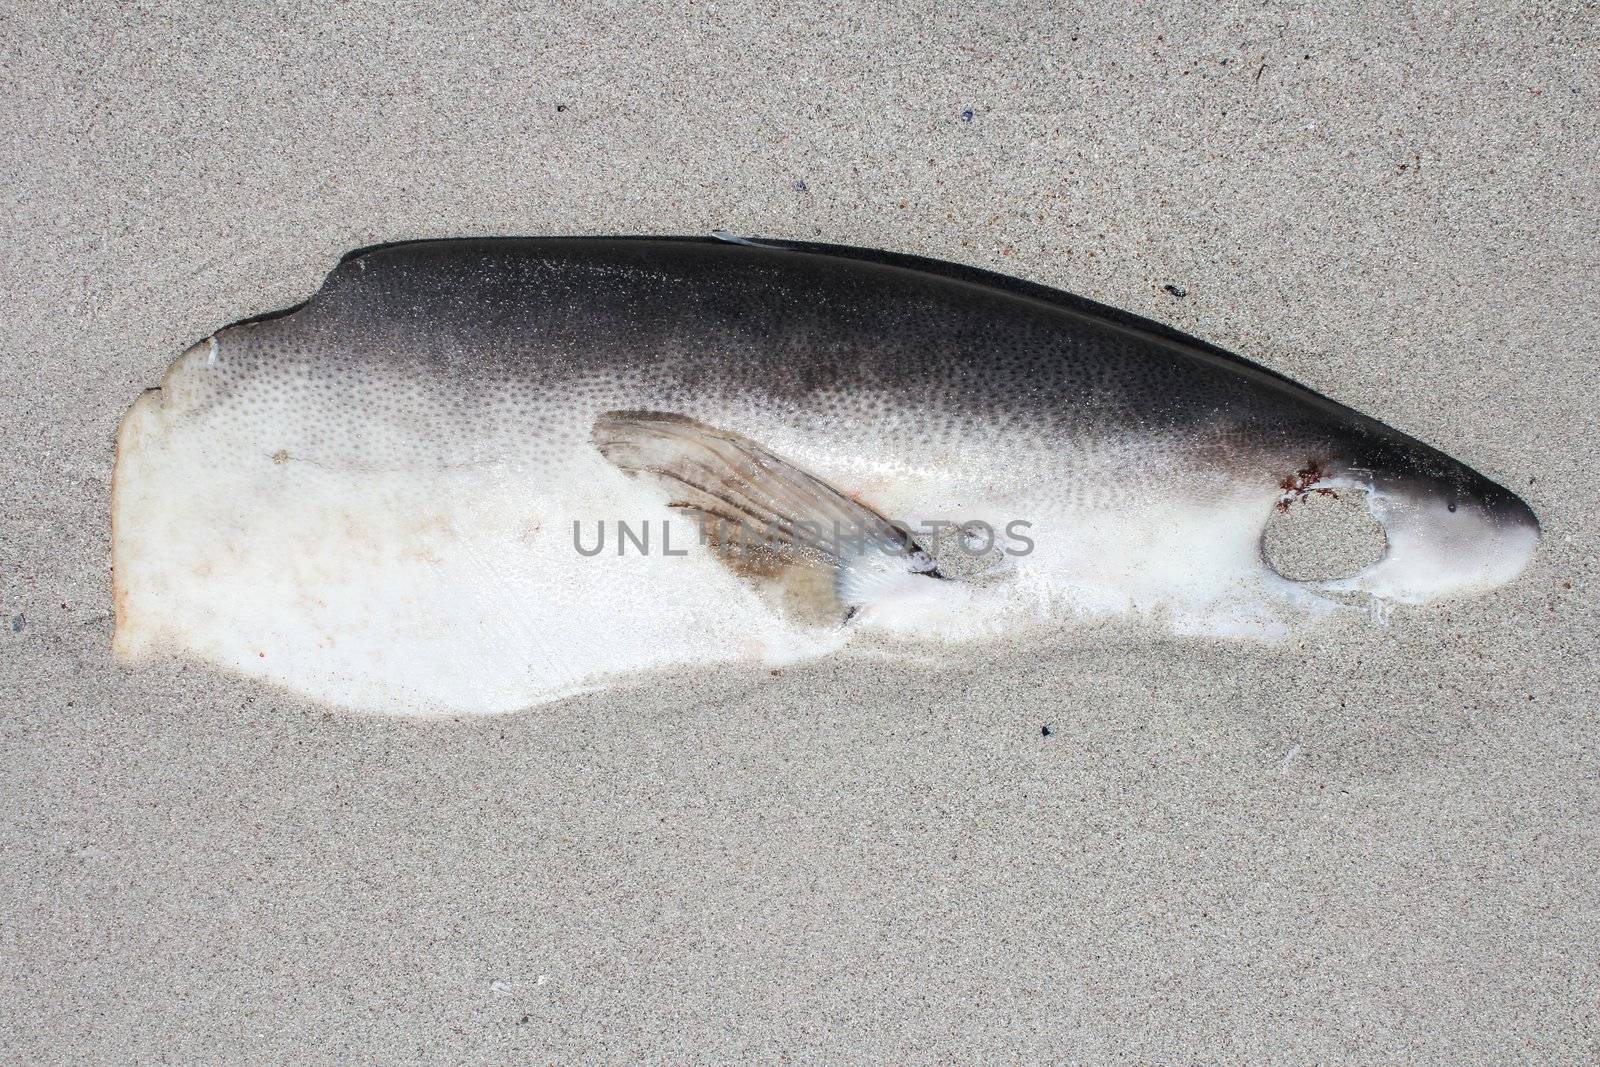 Dead Fish lying at the beach of Kommetjie, Cape Town, South Africa